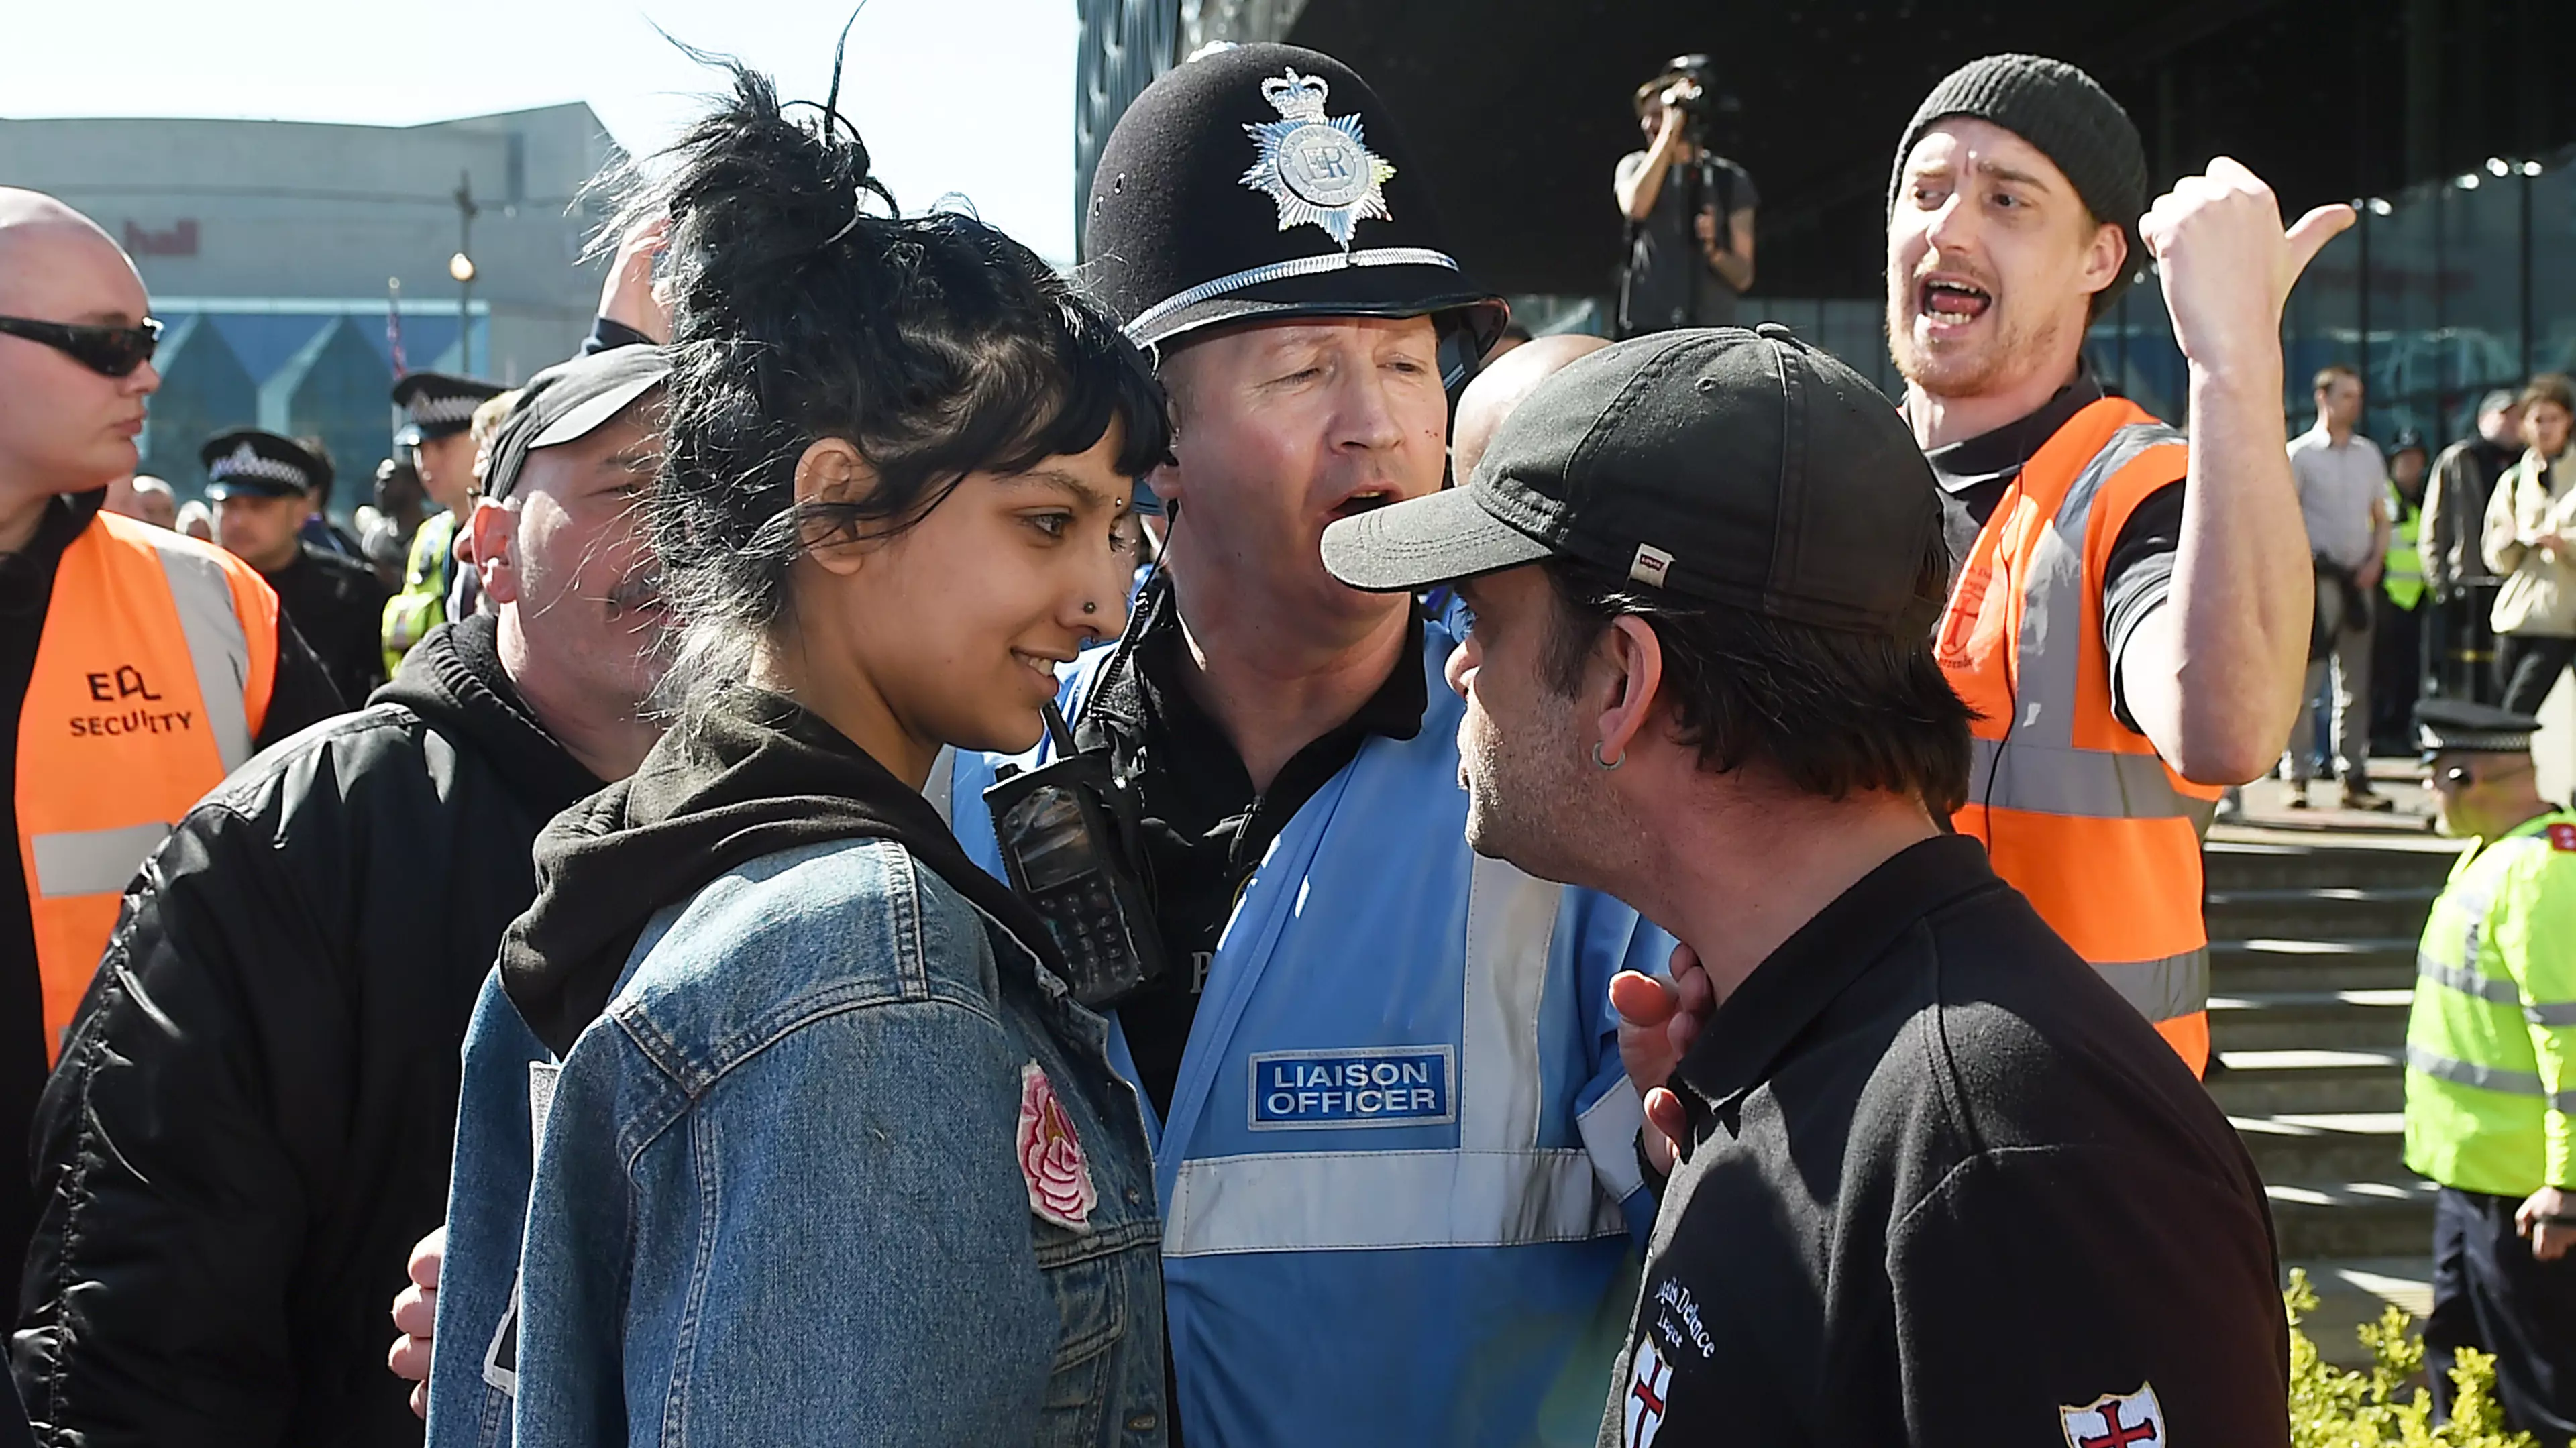 Activist Saffiyah Khan Who Stood Up To EDL Is Now A Model